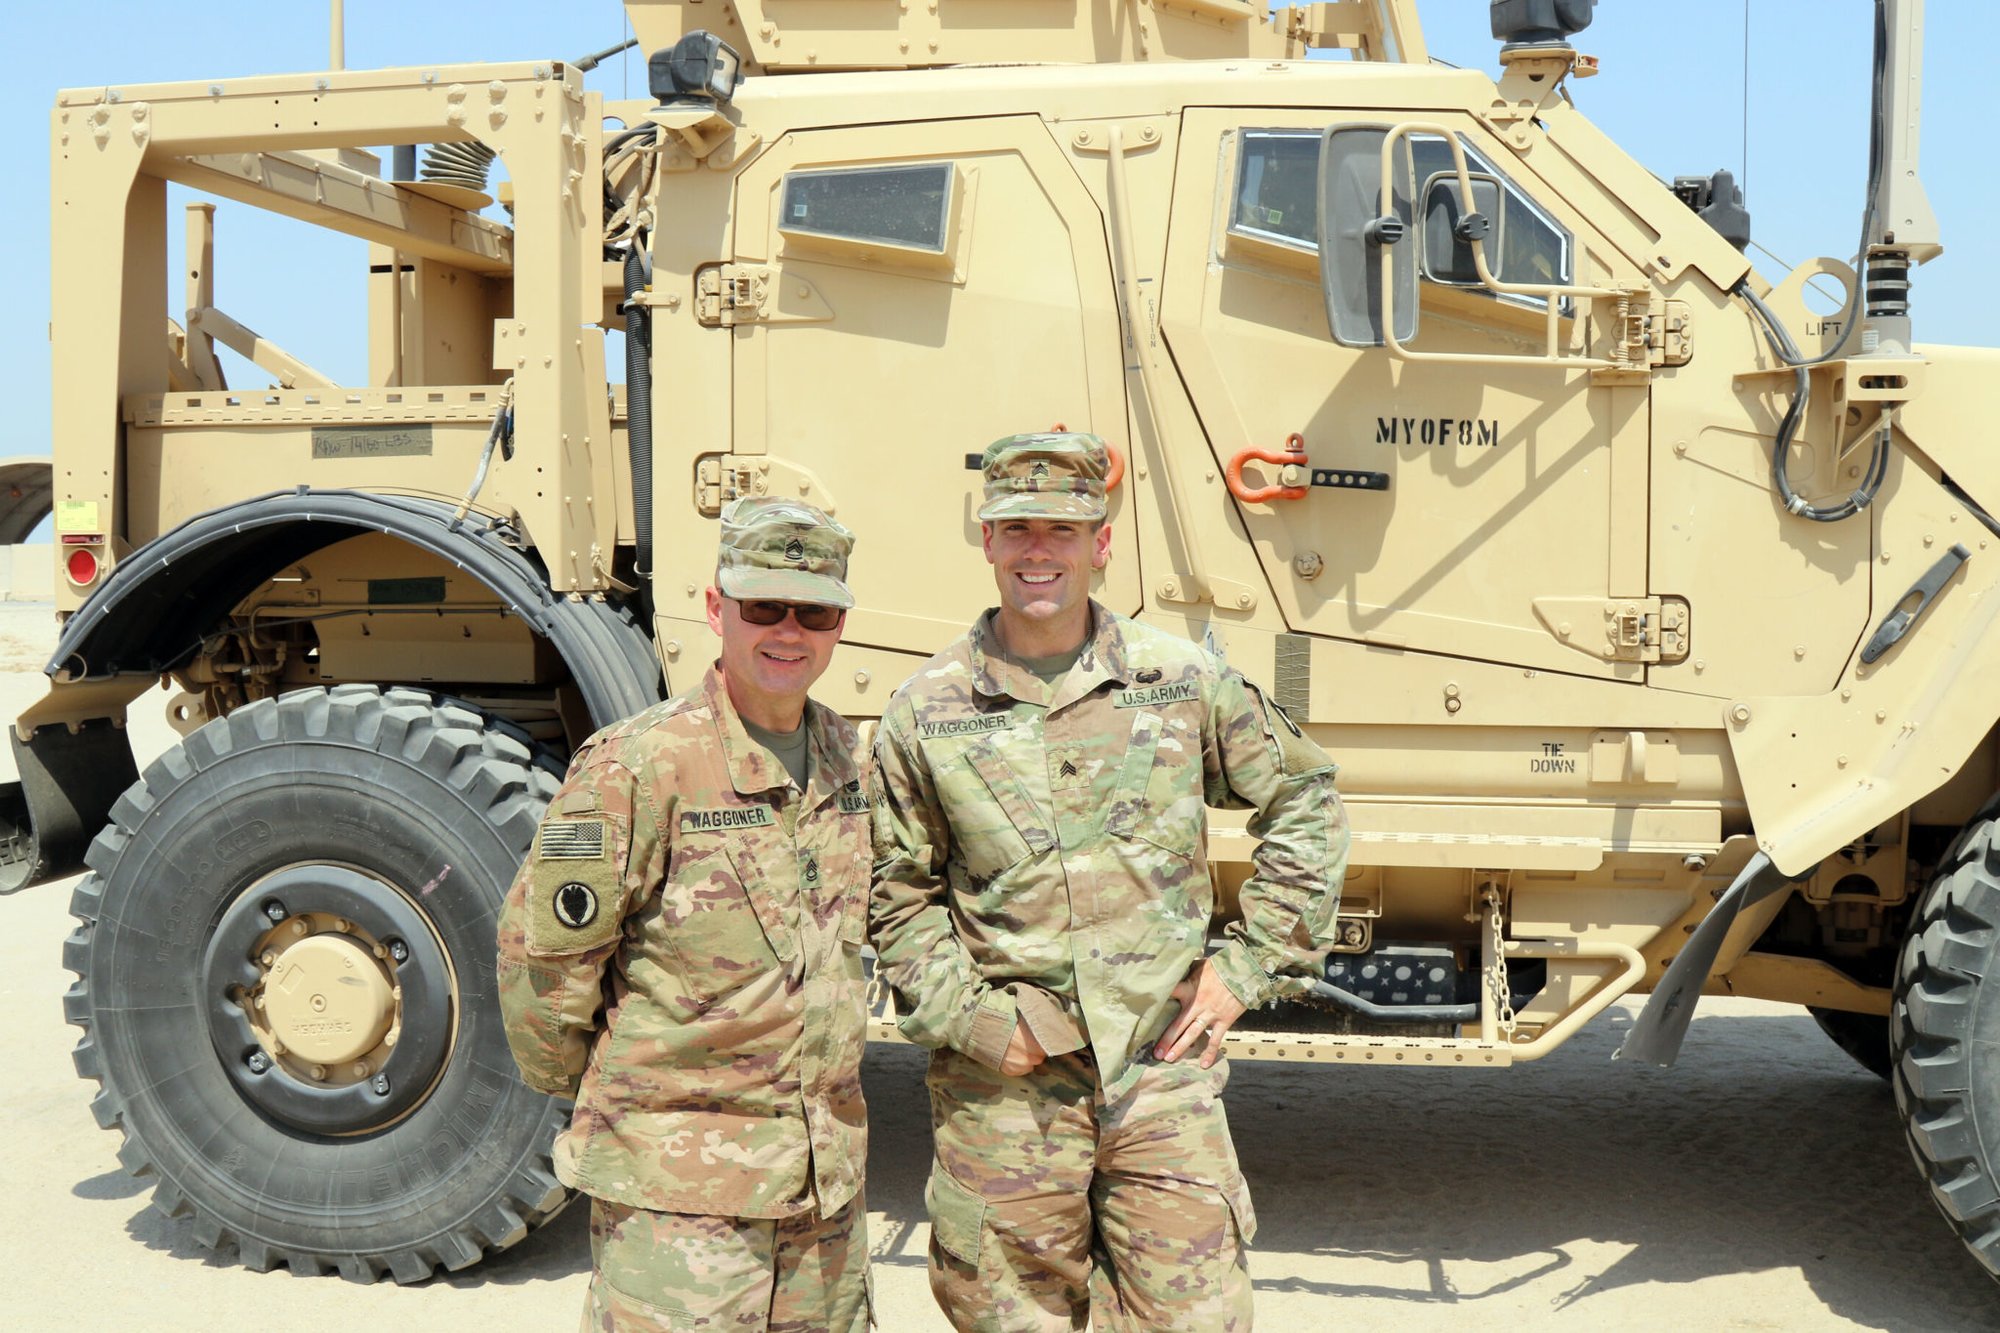 Indiana National Guard Sgt. 1st Class Teddy Waggoner, 38th Infantry Division, deployed with Task Force Spartan in Kuwait,  poses in front of a mine-resistant ambush protected light tactical vehicle with his son, Sgt. Cole Waggoner, 101st Airborne Division, during a short visit before Cole returns home to Fort Campbell, Kentucky following a 9-month deployment in Iraq.